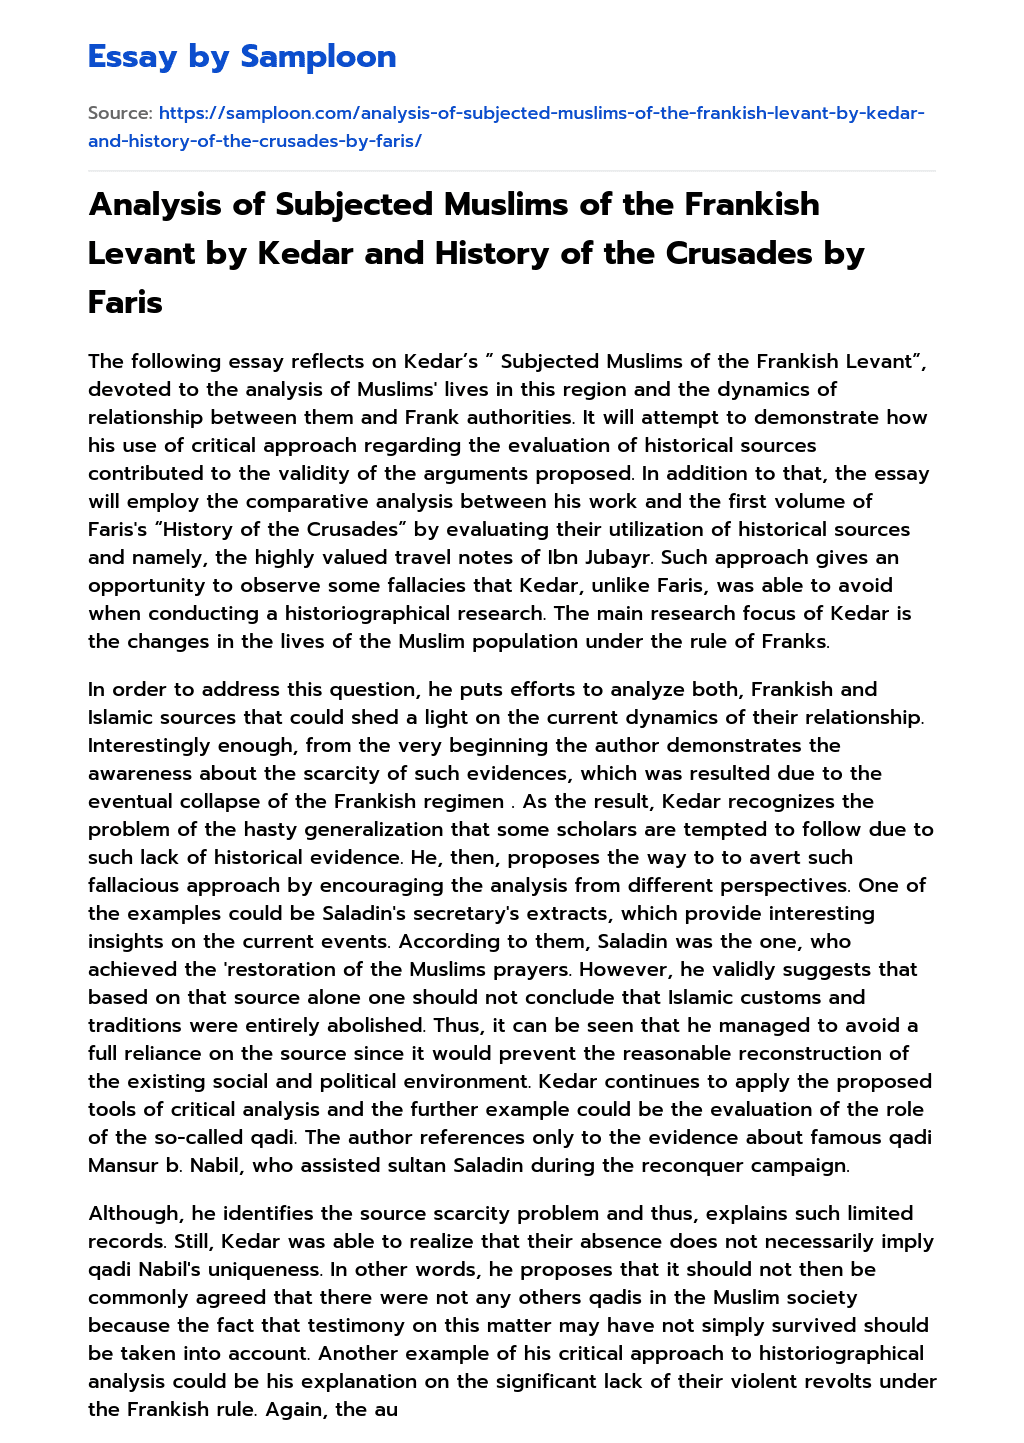 Analysis of Subjected Muslims of the Frankish Levant by Kedar and History of the Crusades by Faris essay